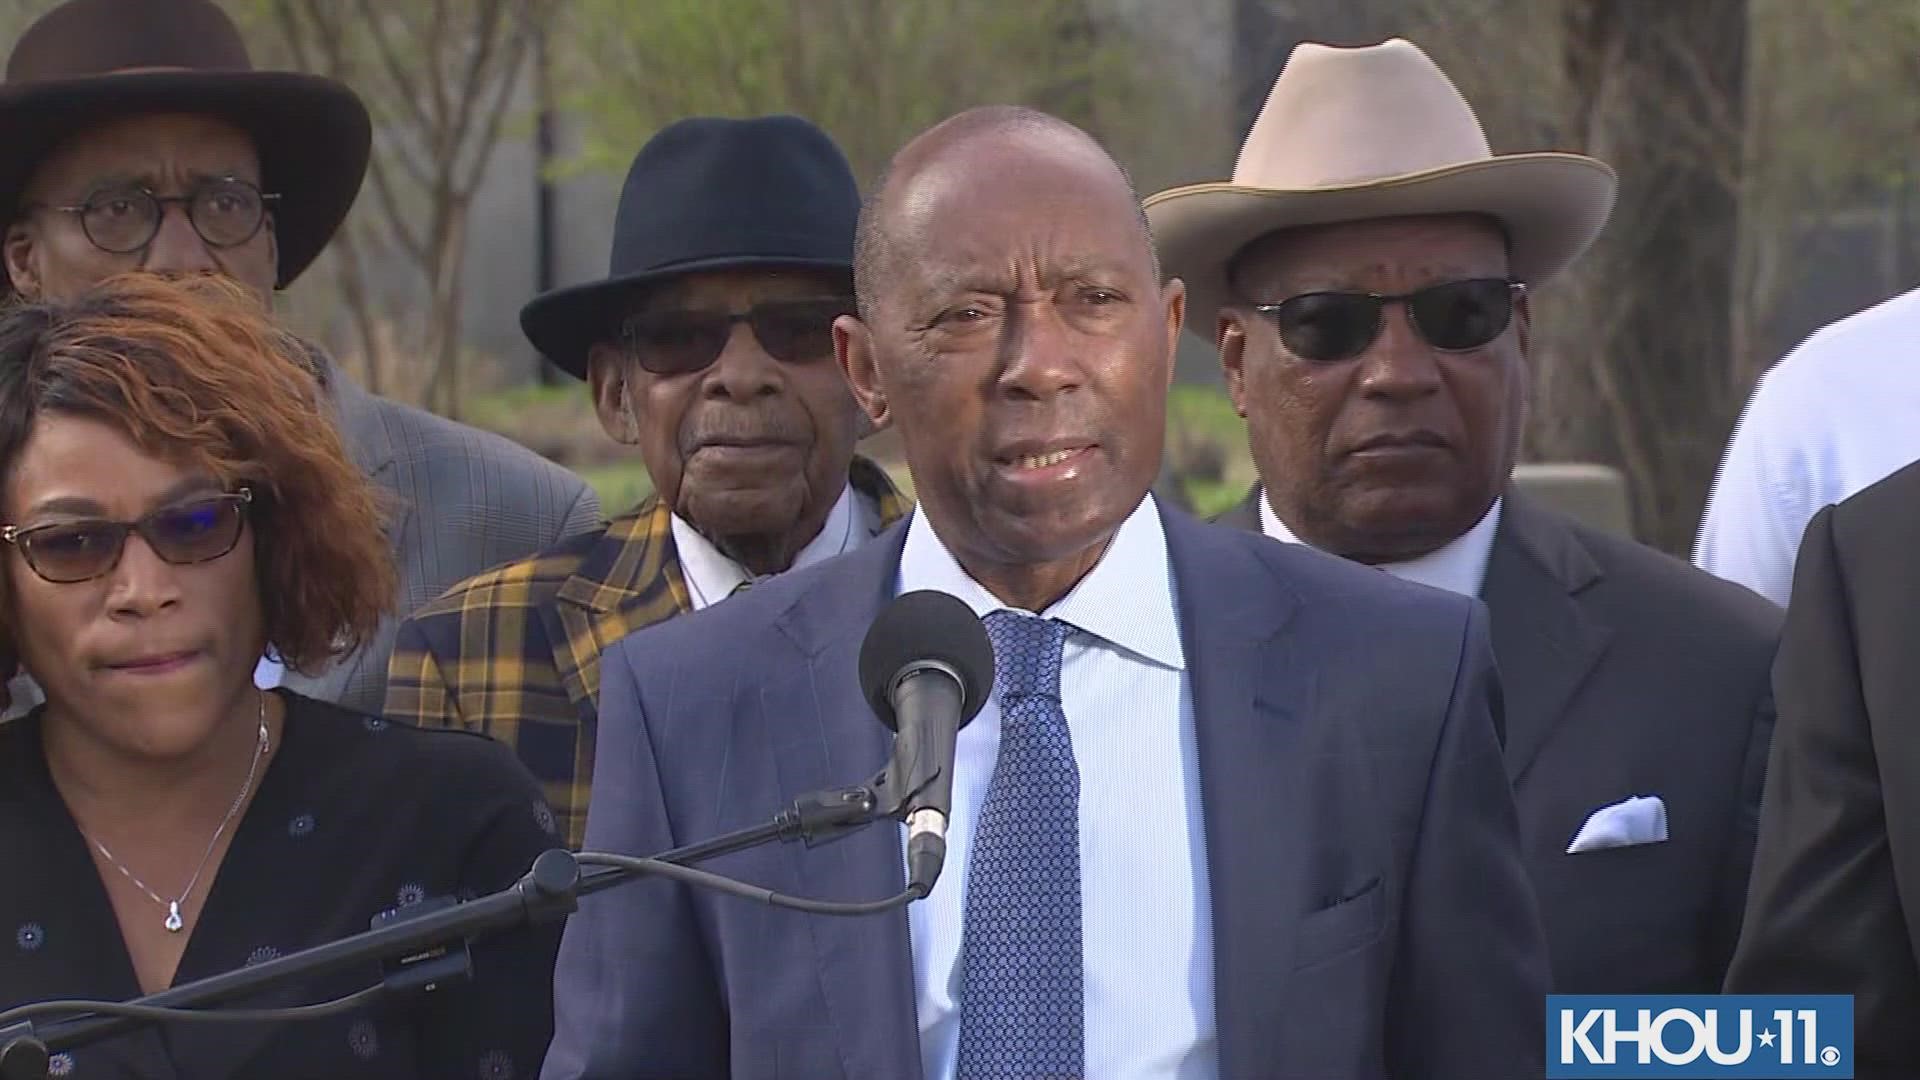 Houston Mayor Sylvester Turner said dozens of unmoved gravesites were found at the historic Evergreen Negro Cemetery during a METRO improvement project.